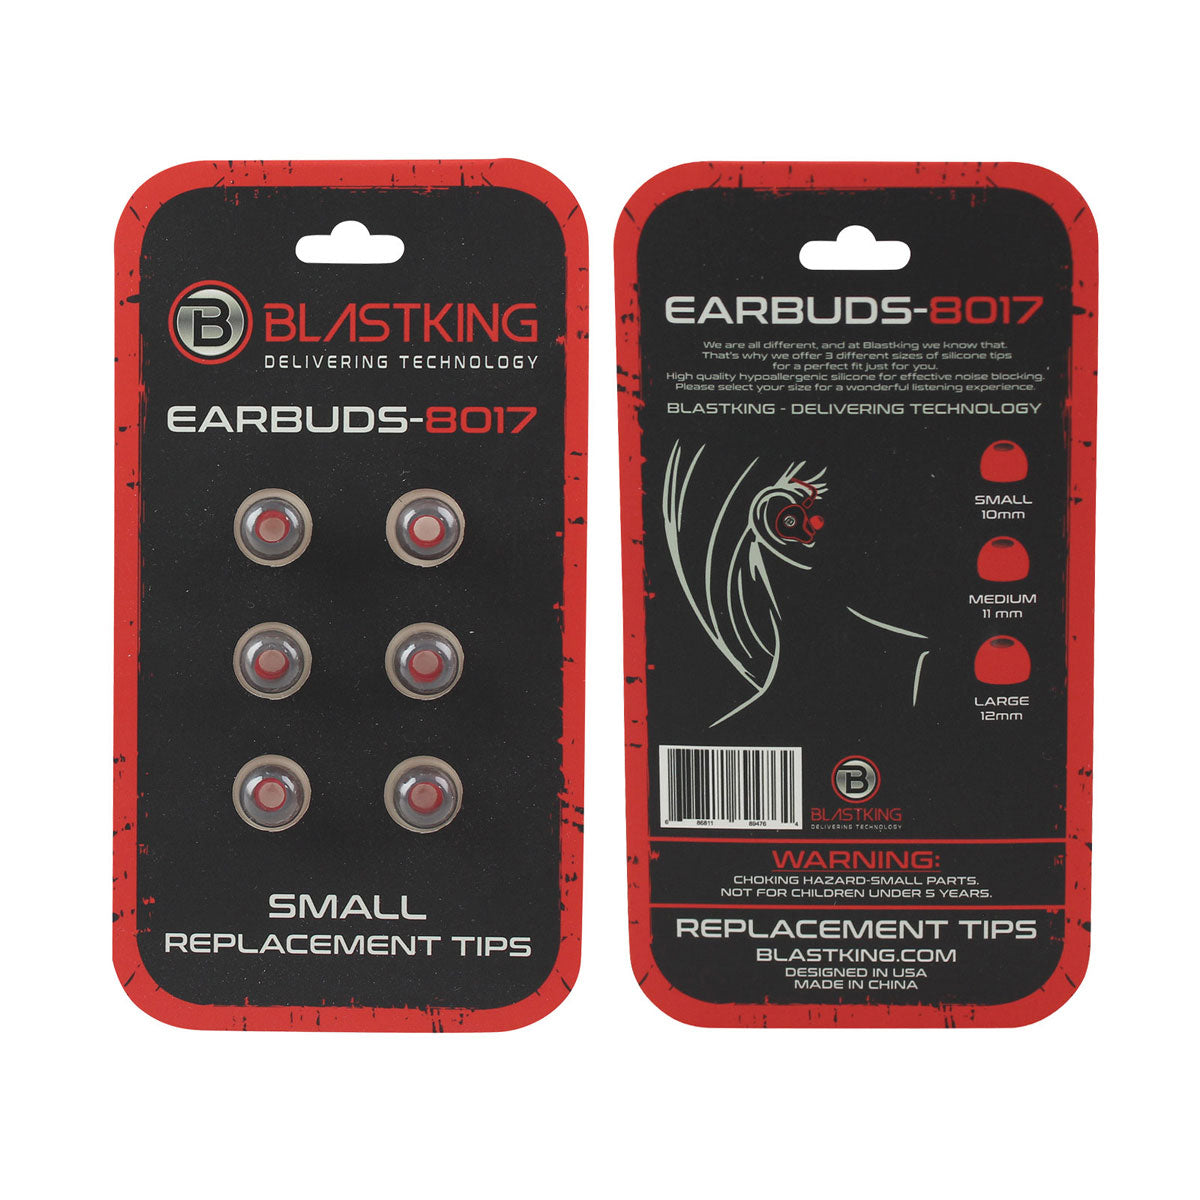 Blastking EARBUDS-8017 Replacement Tips